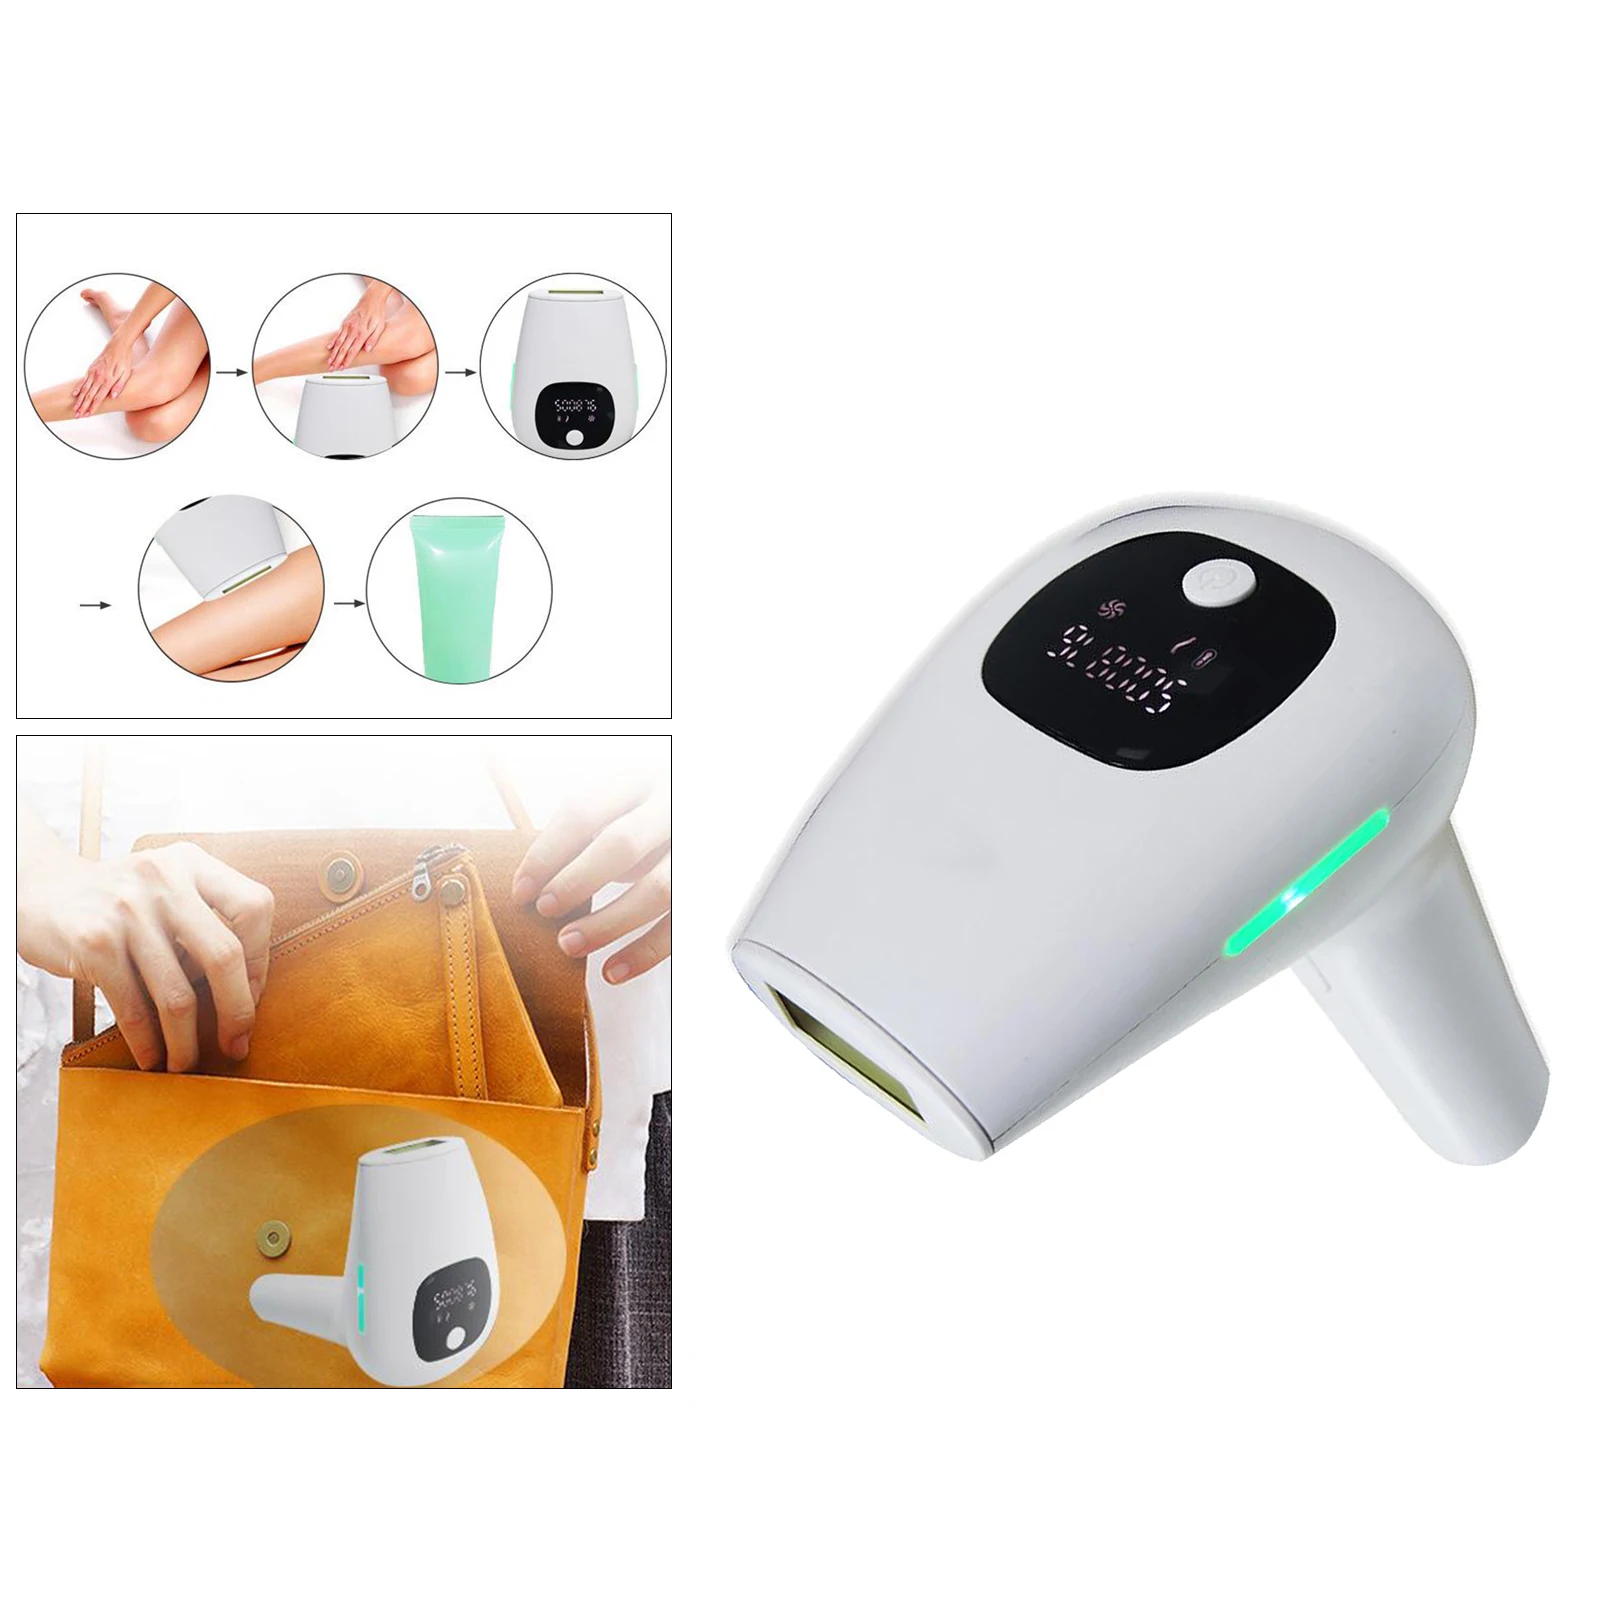  Hair Removal Permanent Painless  Hair Remover Device for Women and Man for Facial Legs, Arms, Armpits, Body, at-Home